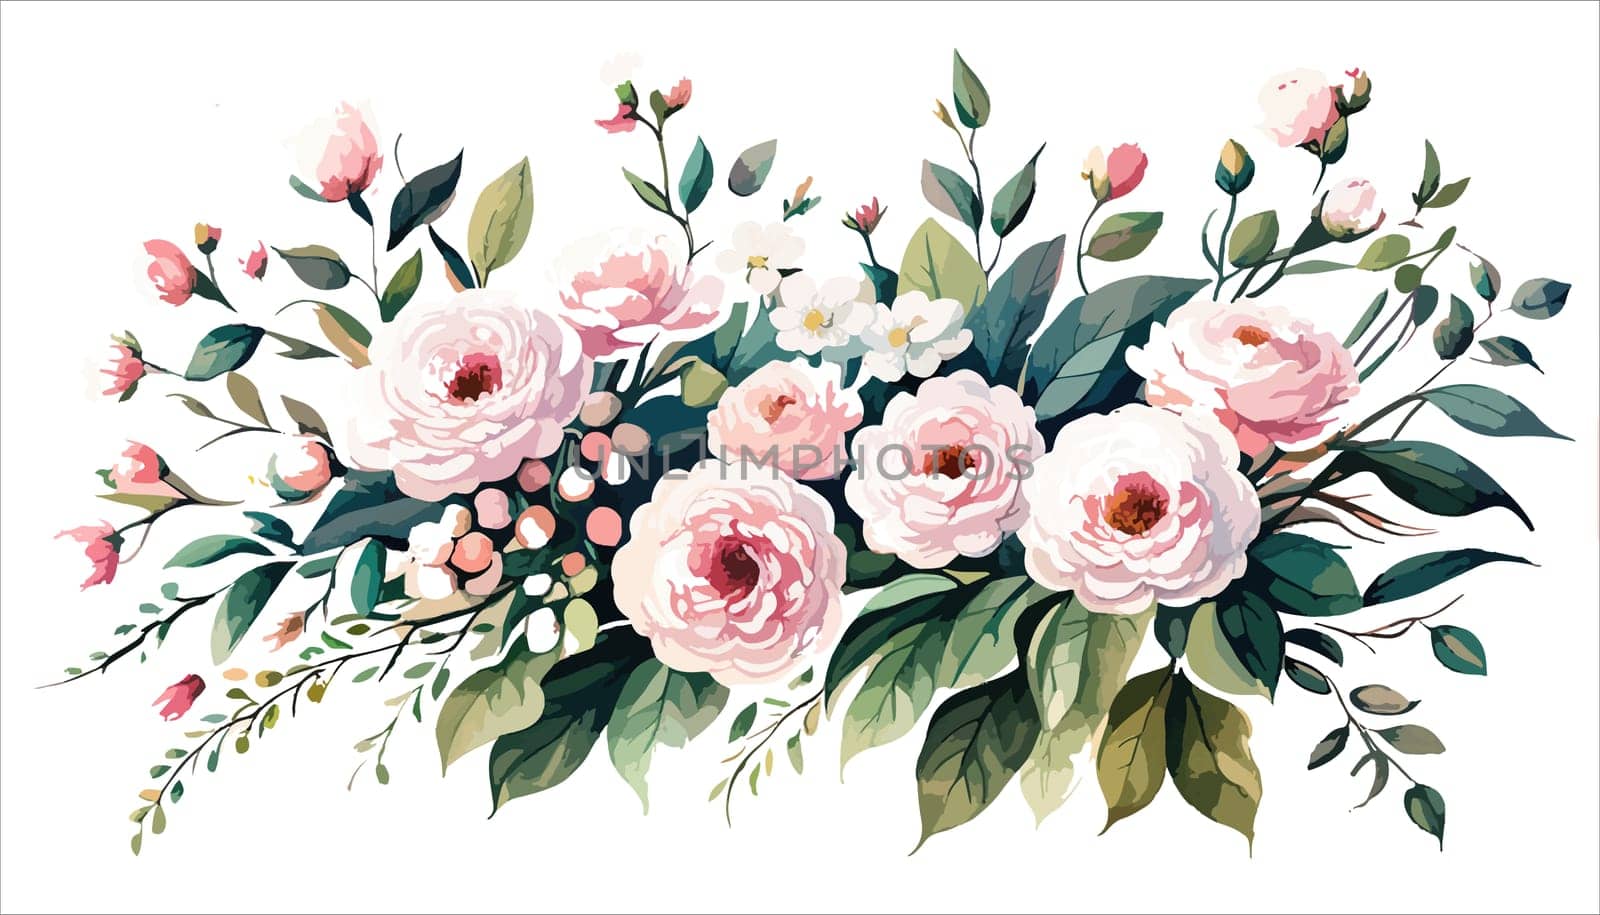 Flowers. Bouquet of pink roses and peony. Drawn flowers on an isolated white background. illustration